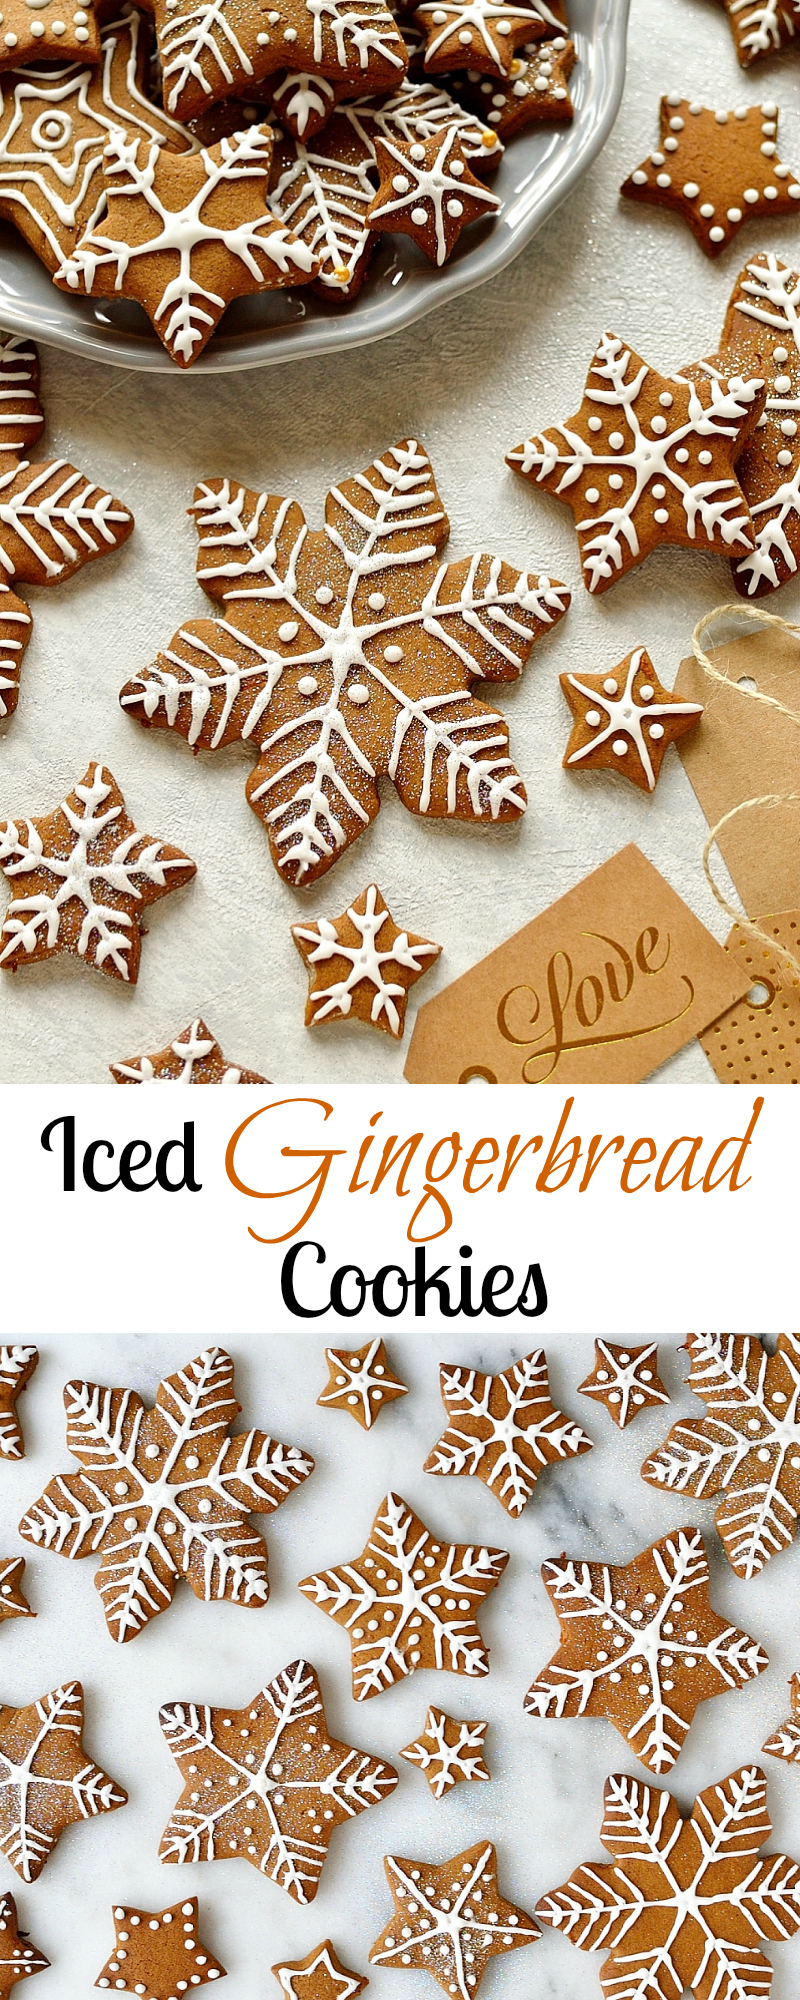 Iced gingerbread cookies pinterest collage